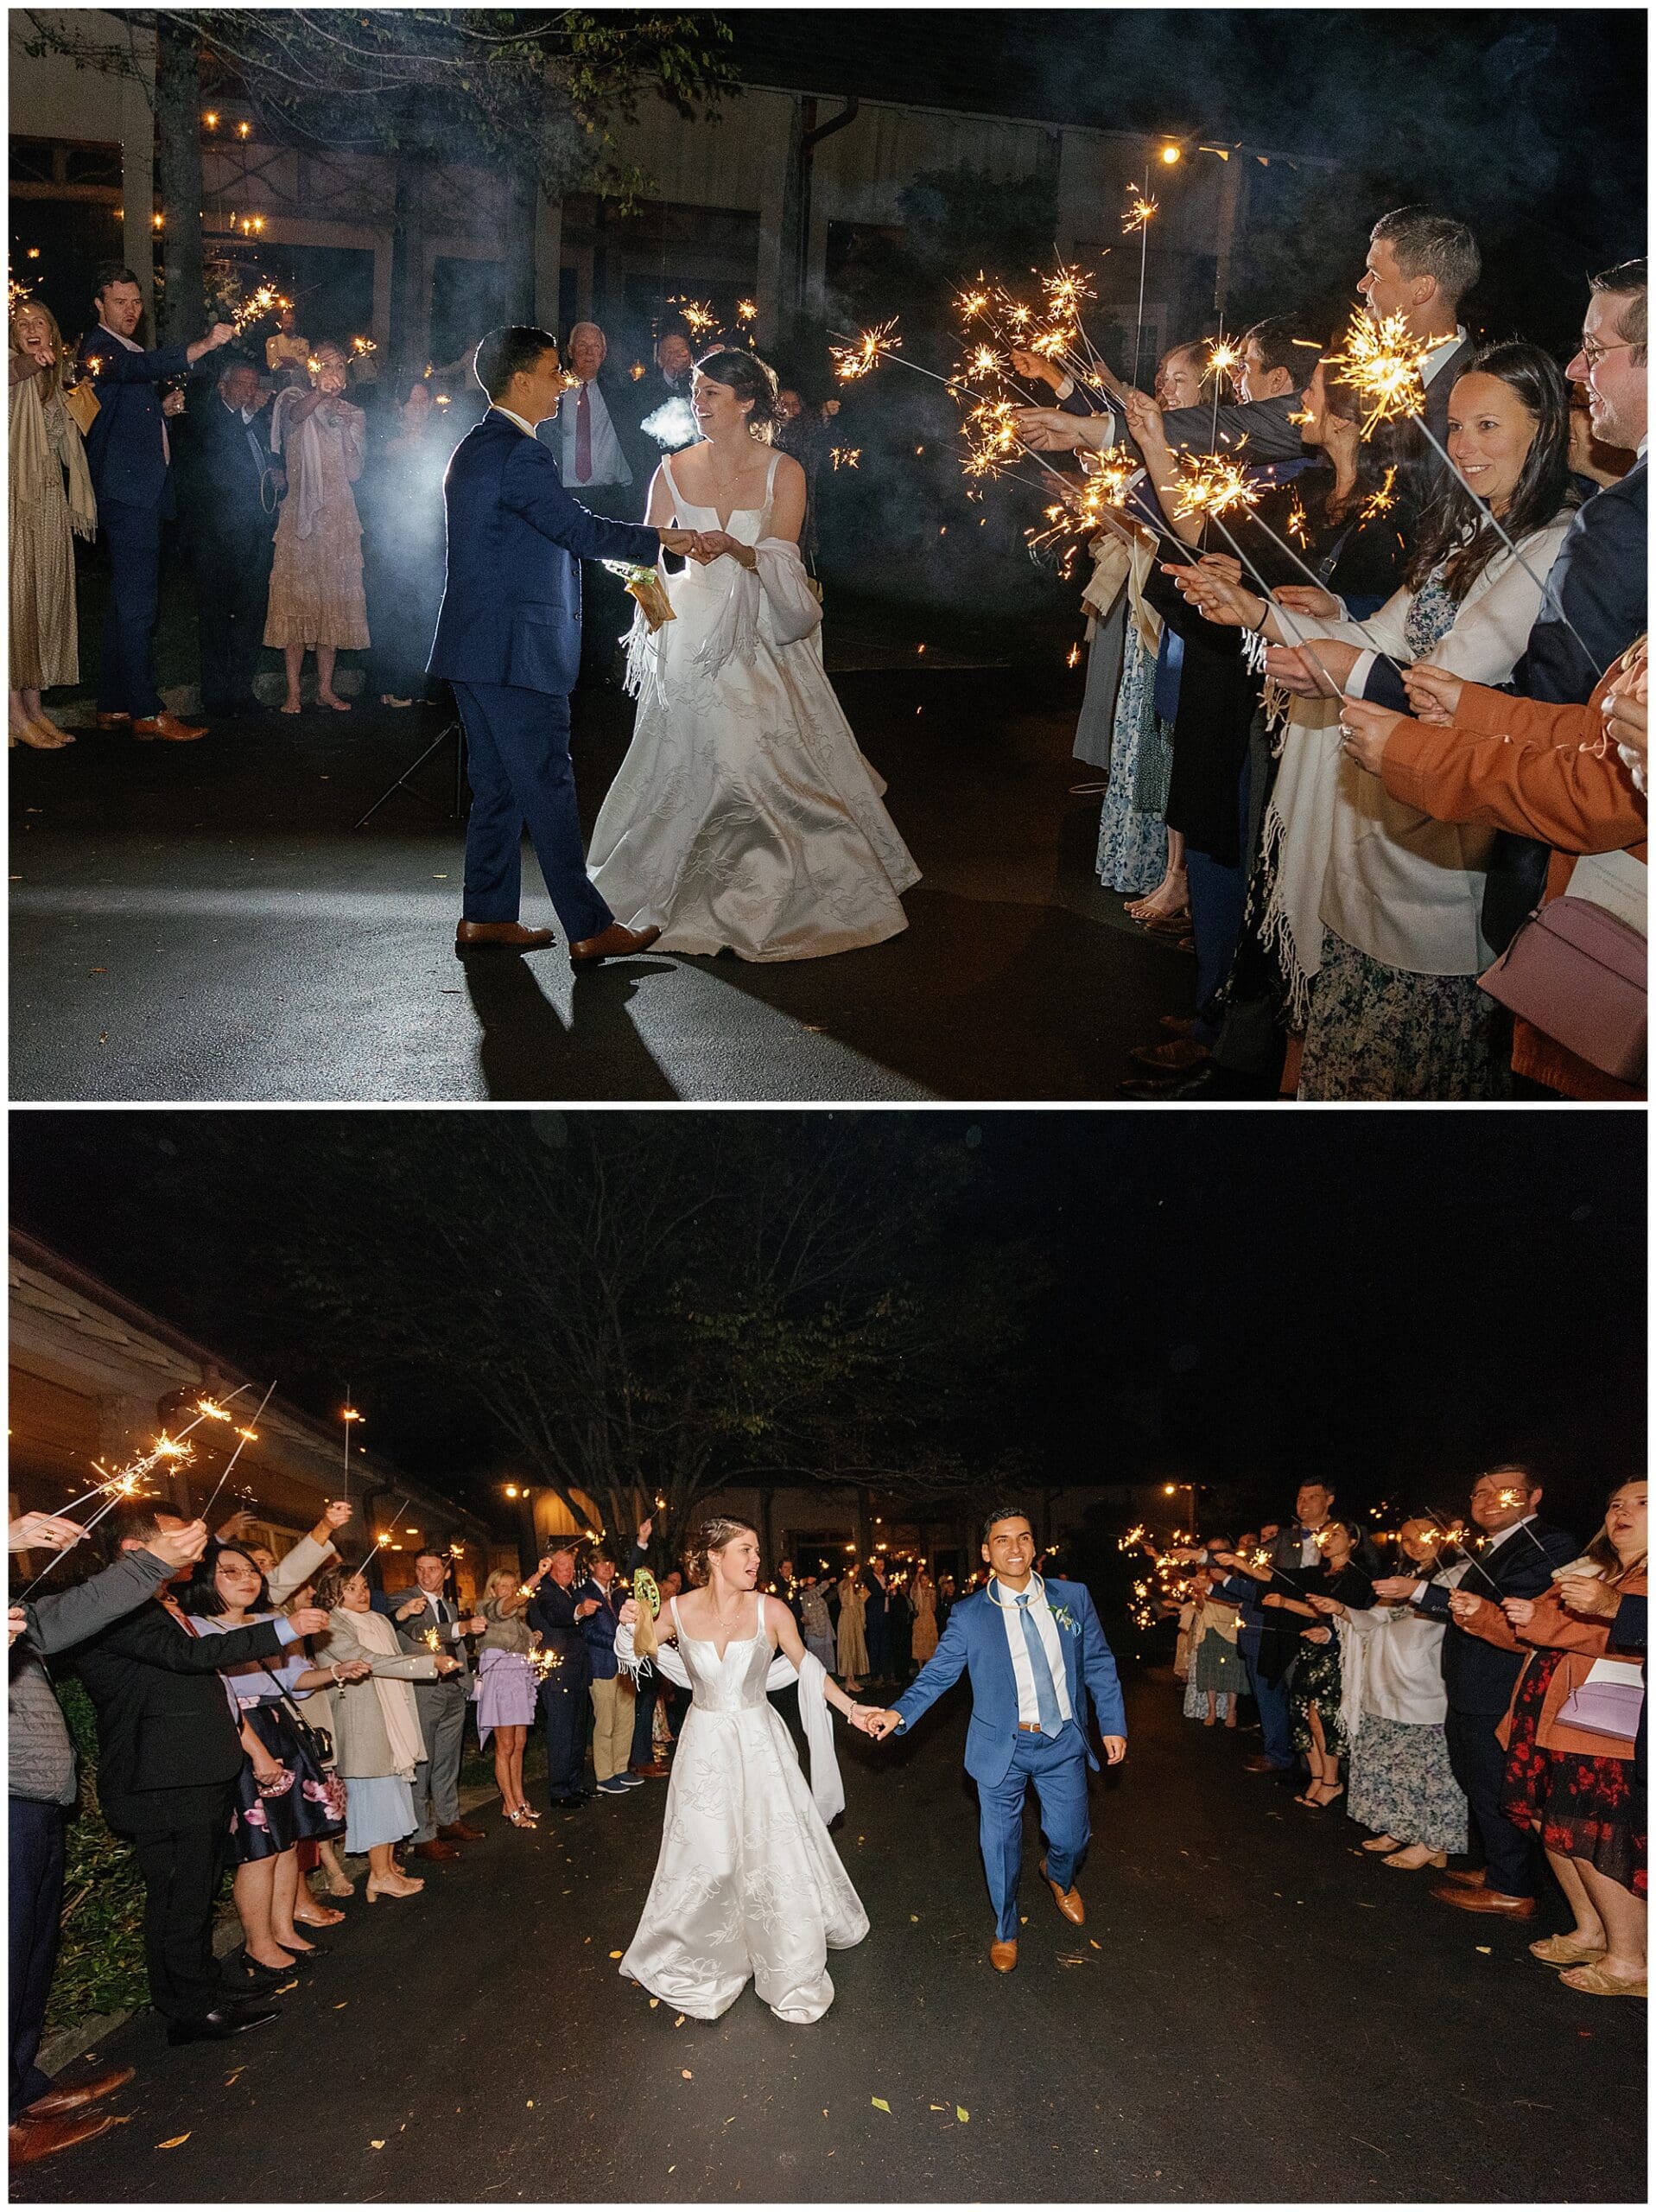 A bride and groom walking down the street with sparklers.